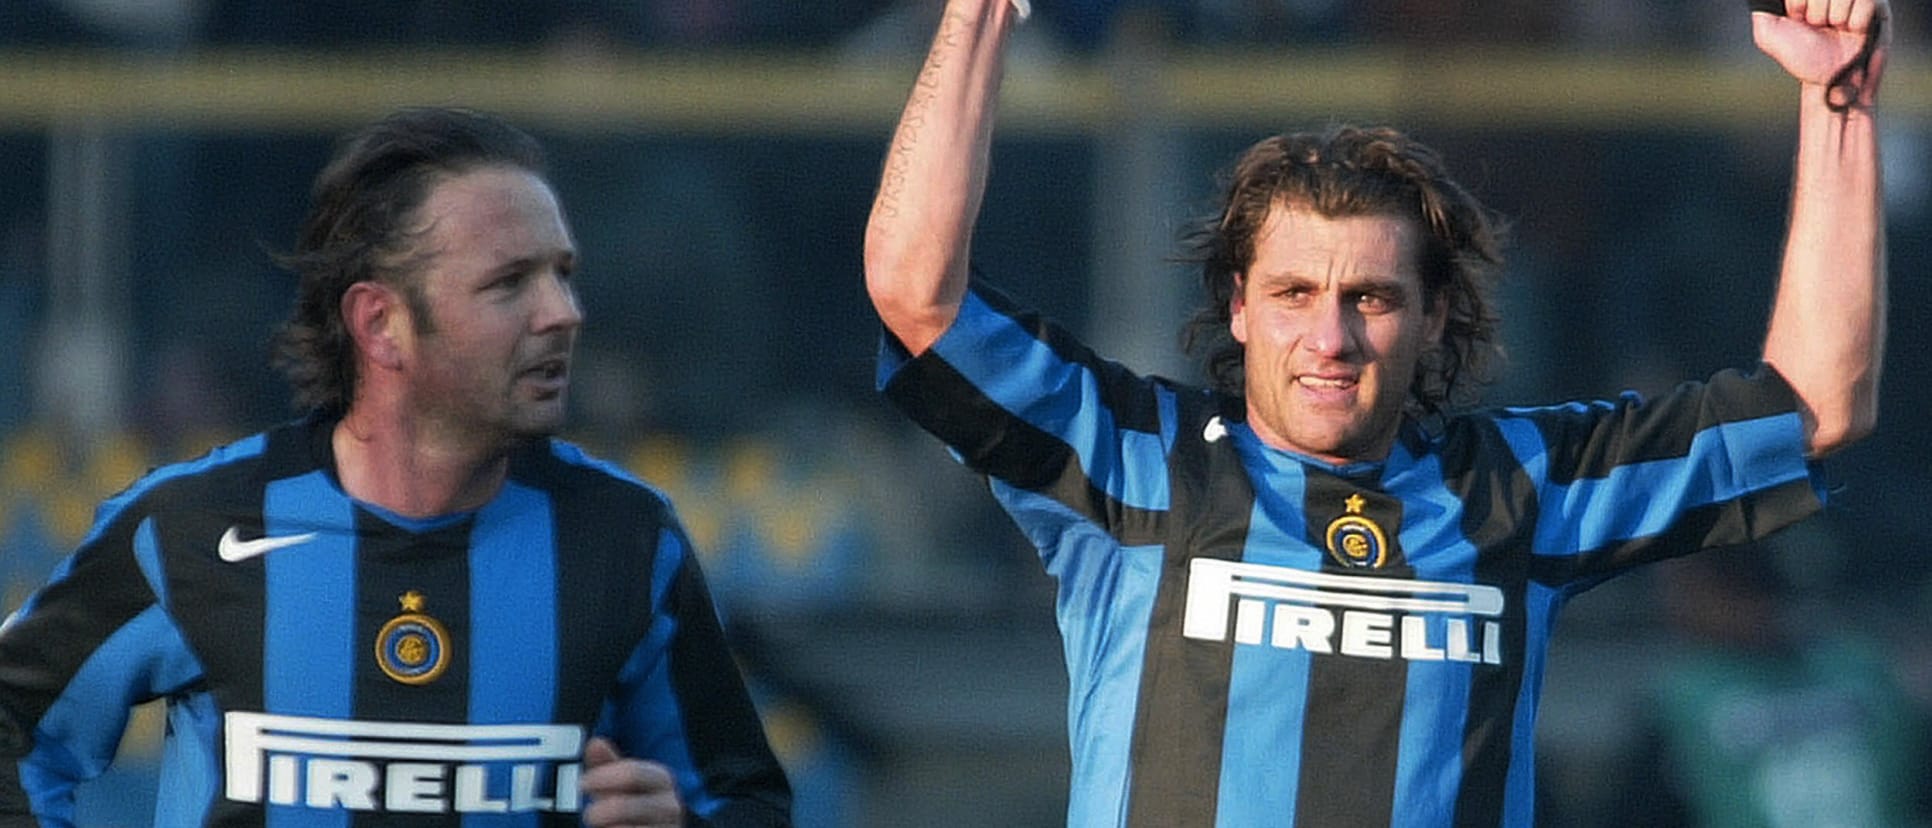 Vieri has had successful spells with a host of Europe's top sides including Atletico Madrid and Inter Milan